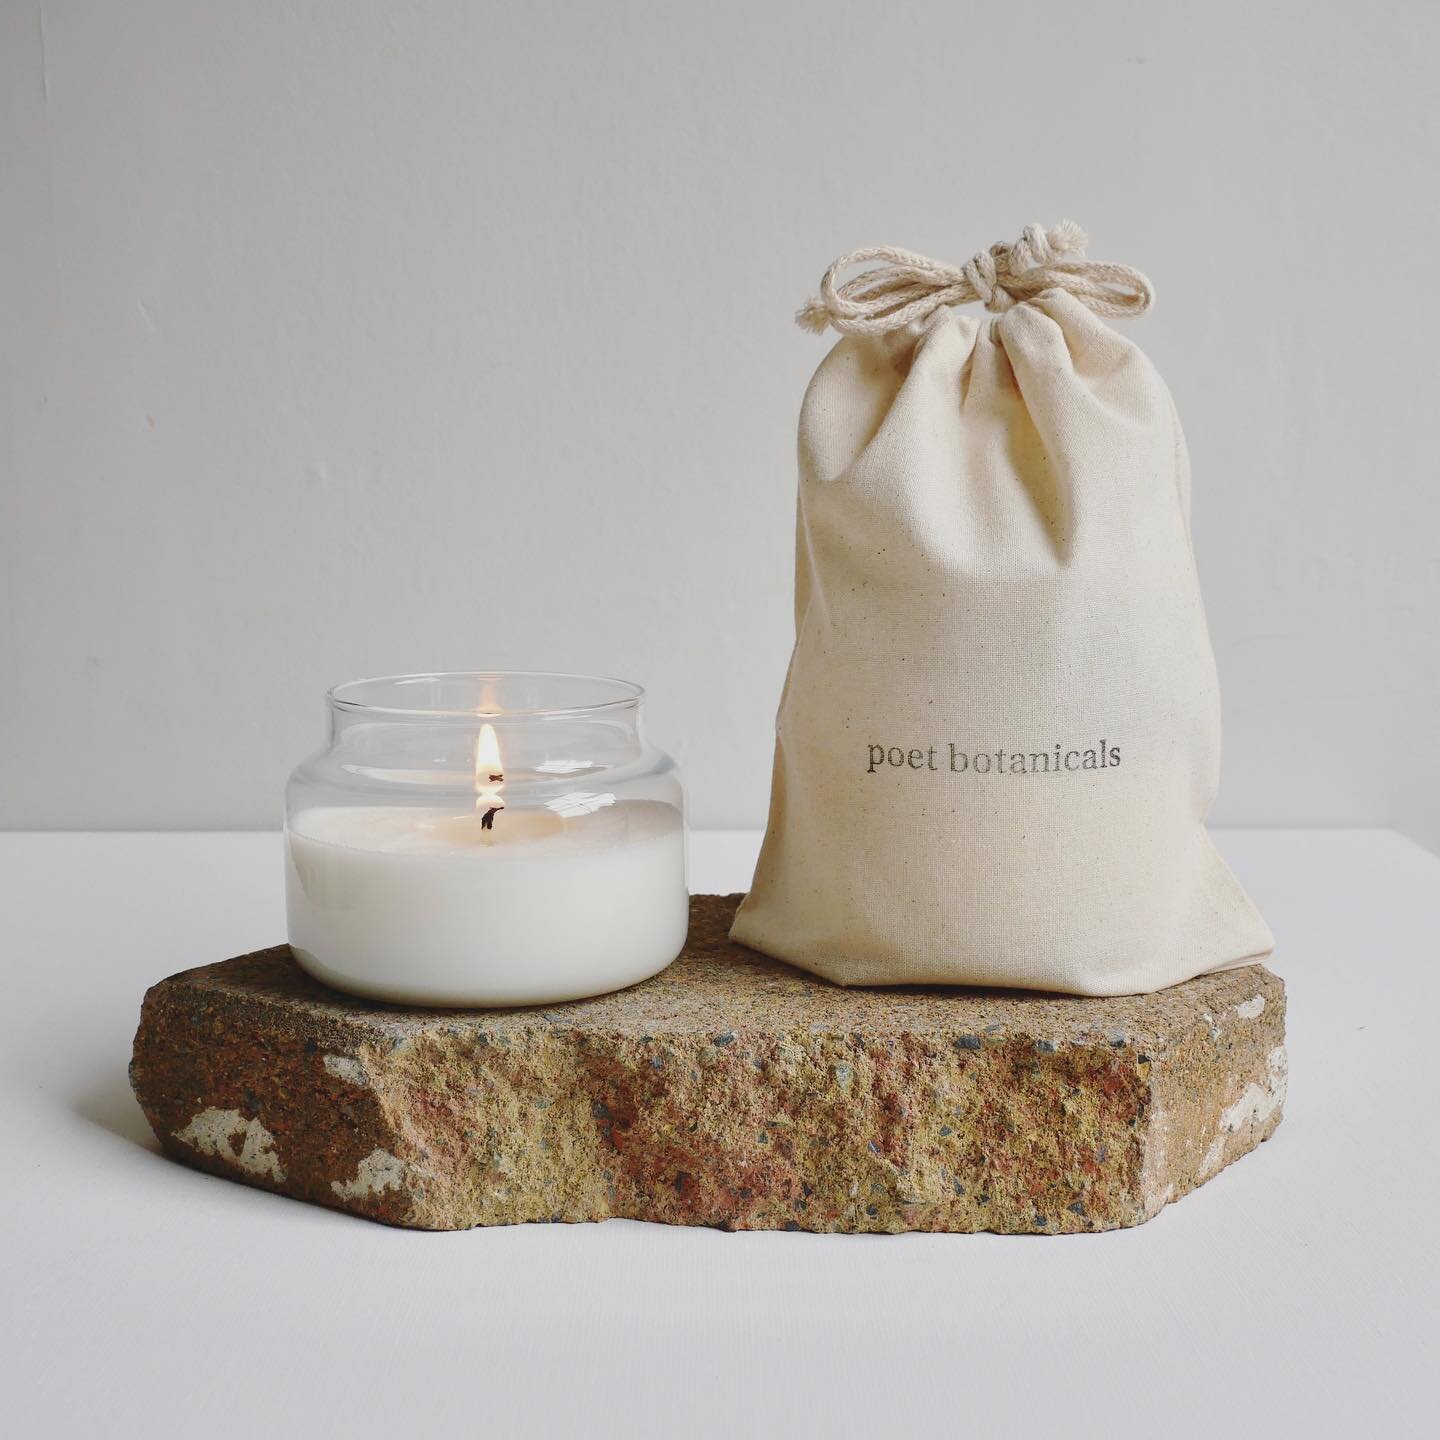 A new addition for the perfect Christmas gift. Gorgeous blends Locally crafted in Island Bay.

THE CLEANEST CANDLE YOU'LL BURN

CLEAN-BURNING COCONUT WAX

Coconut wax is a luscious, pure white wax that is completely clean-burning. It's non-GMO, pesti